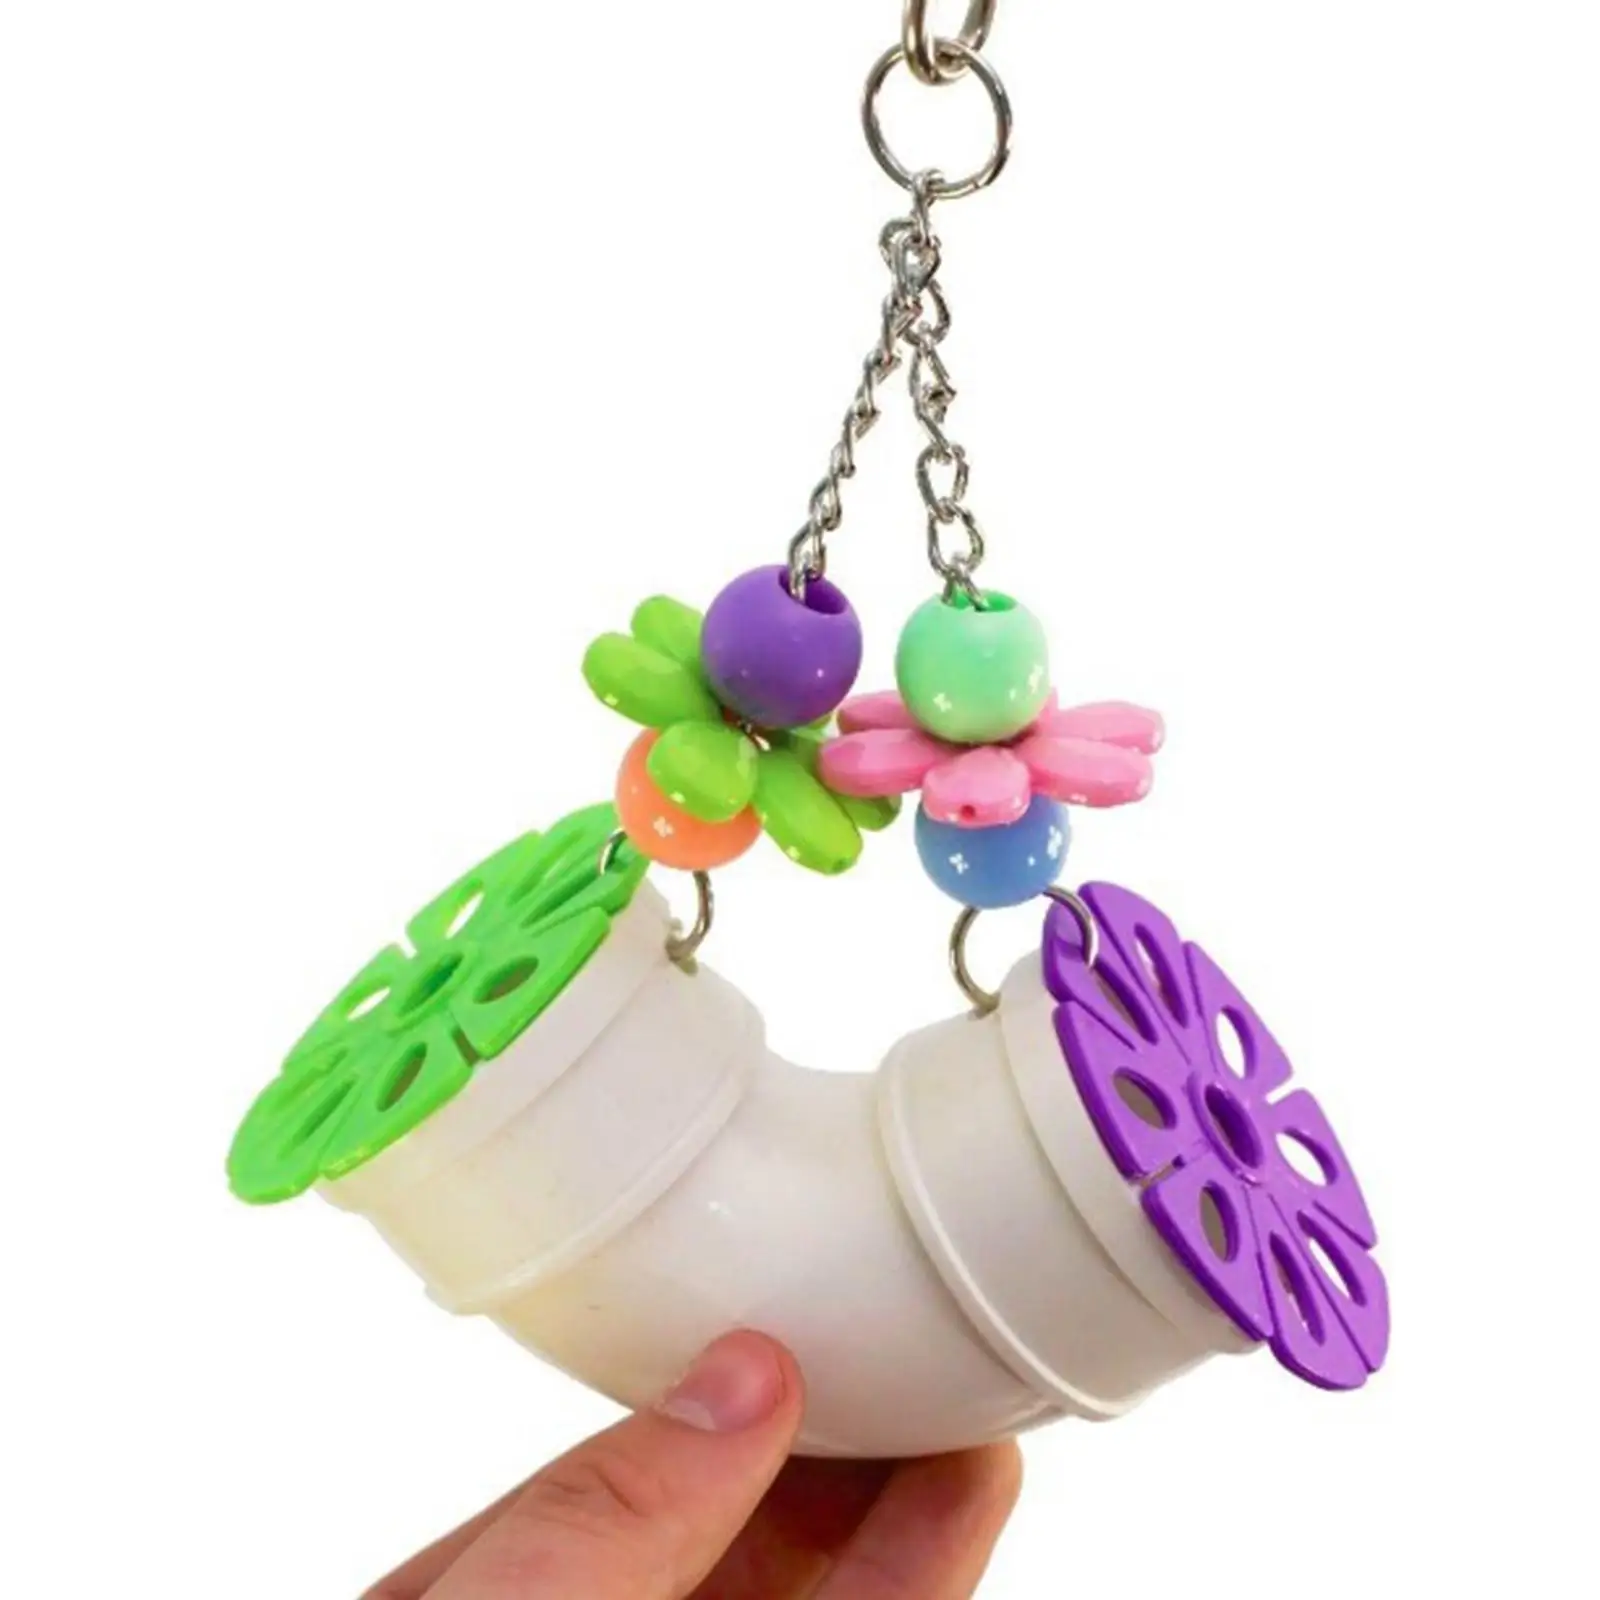 Parrot Toys Pipeline Cage Bite Toy Bird Chewing Toy Cage Hanging Accessory for Cockatoos Cockatiels Budgies Lovebird Parrot Gift